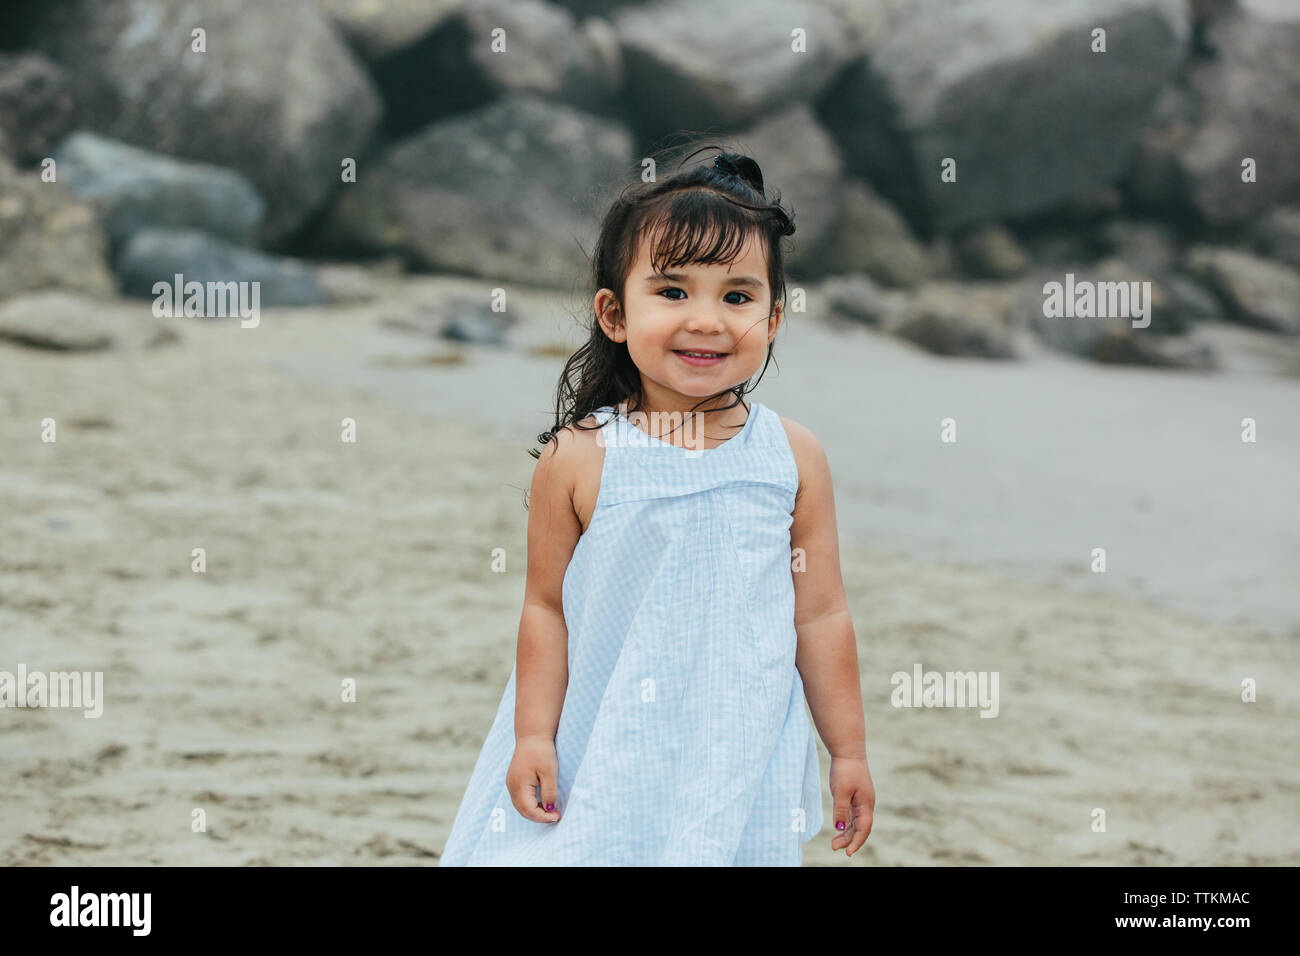 Cute Ethnically Ambiguous Toddler Girl Smiles For Camera At Beach Stock Photo